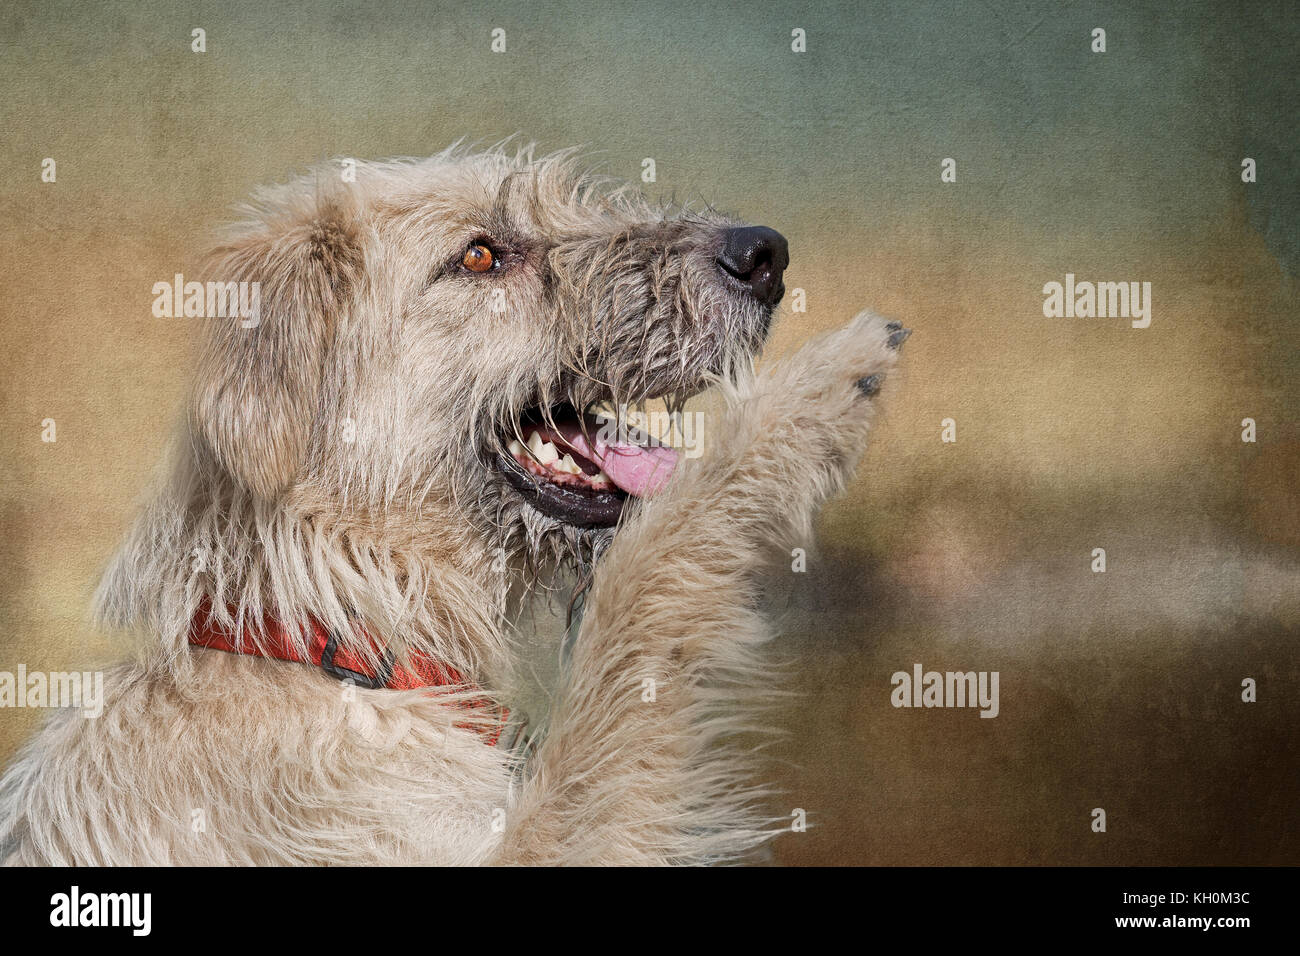 Attention-seeking dog giving paw. Wet and bedraggled but cute! Stock Photo